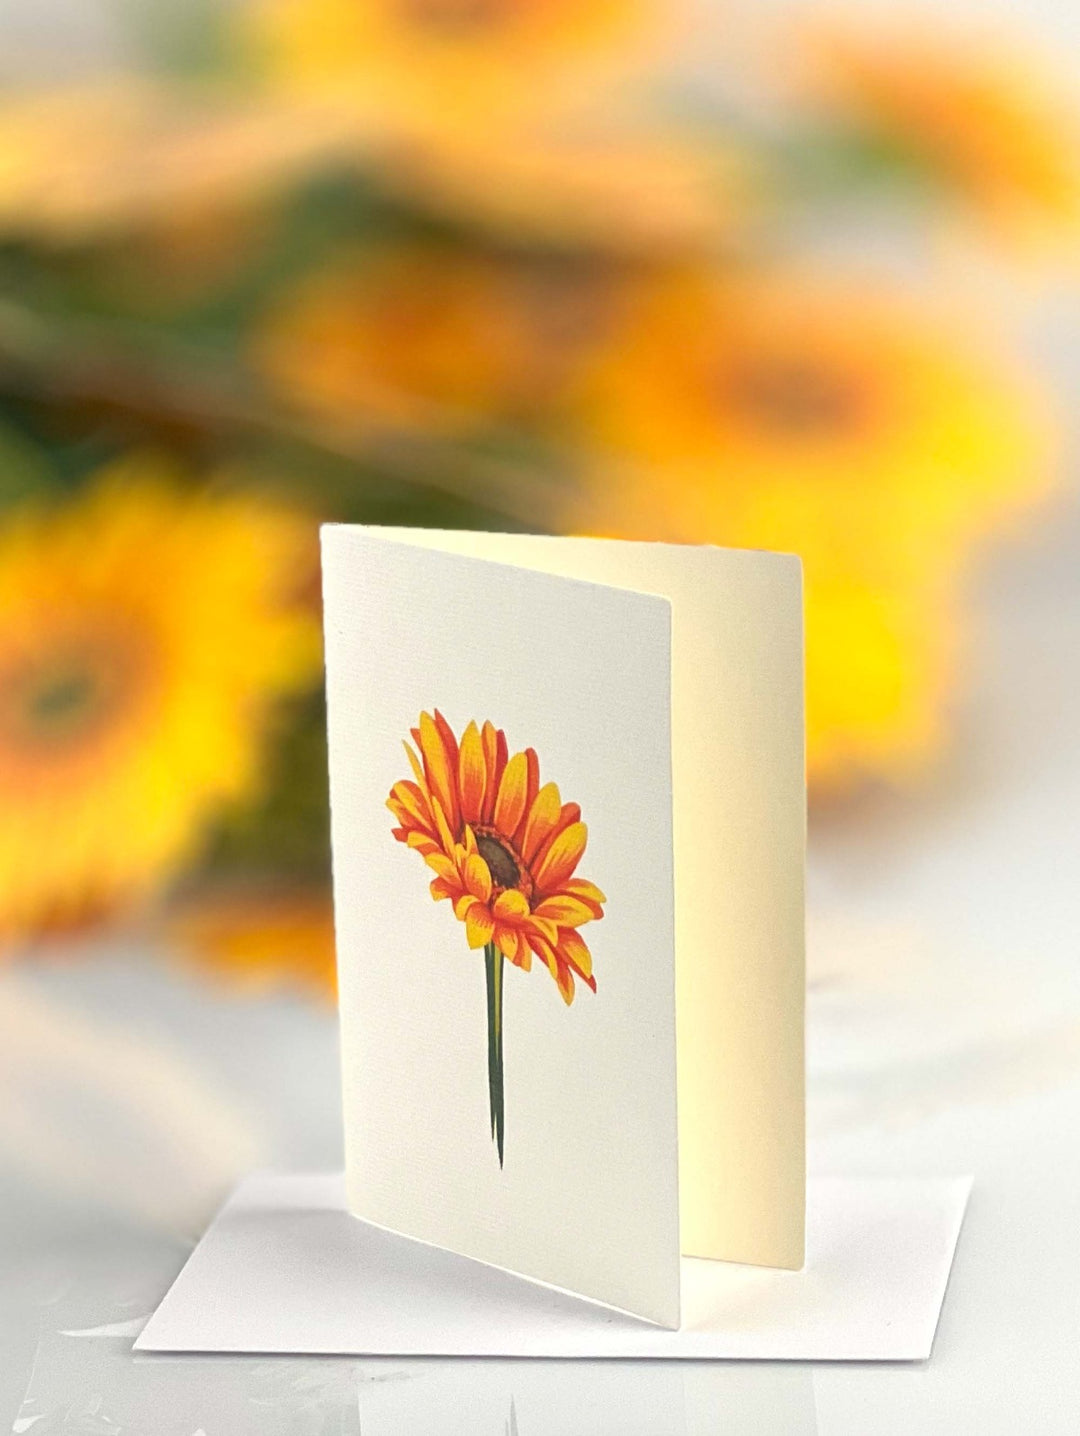 FreshCut Paper's 3D pop up Sunflower Grand paper flower bouquet include a matching 2.75" x 8" note card so you may write your own personal message to your gift recipient.